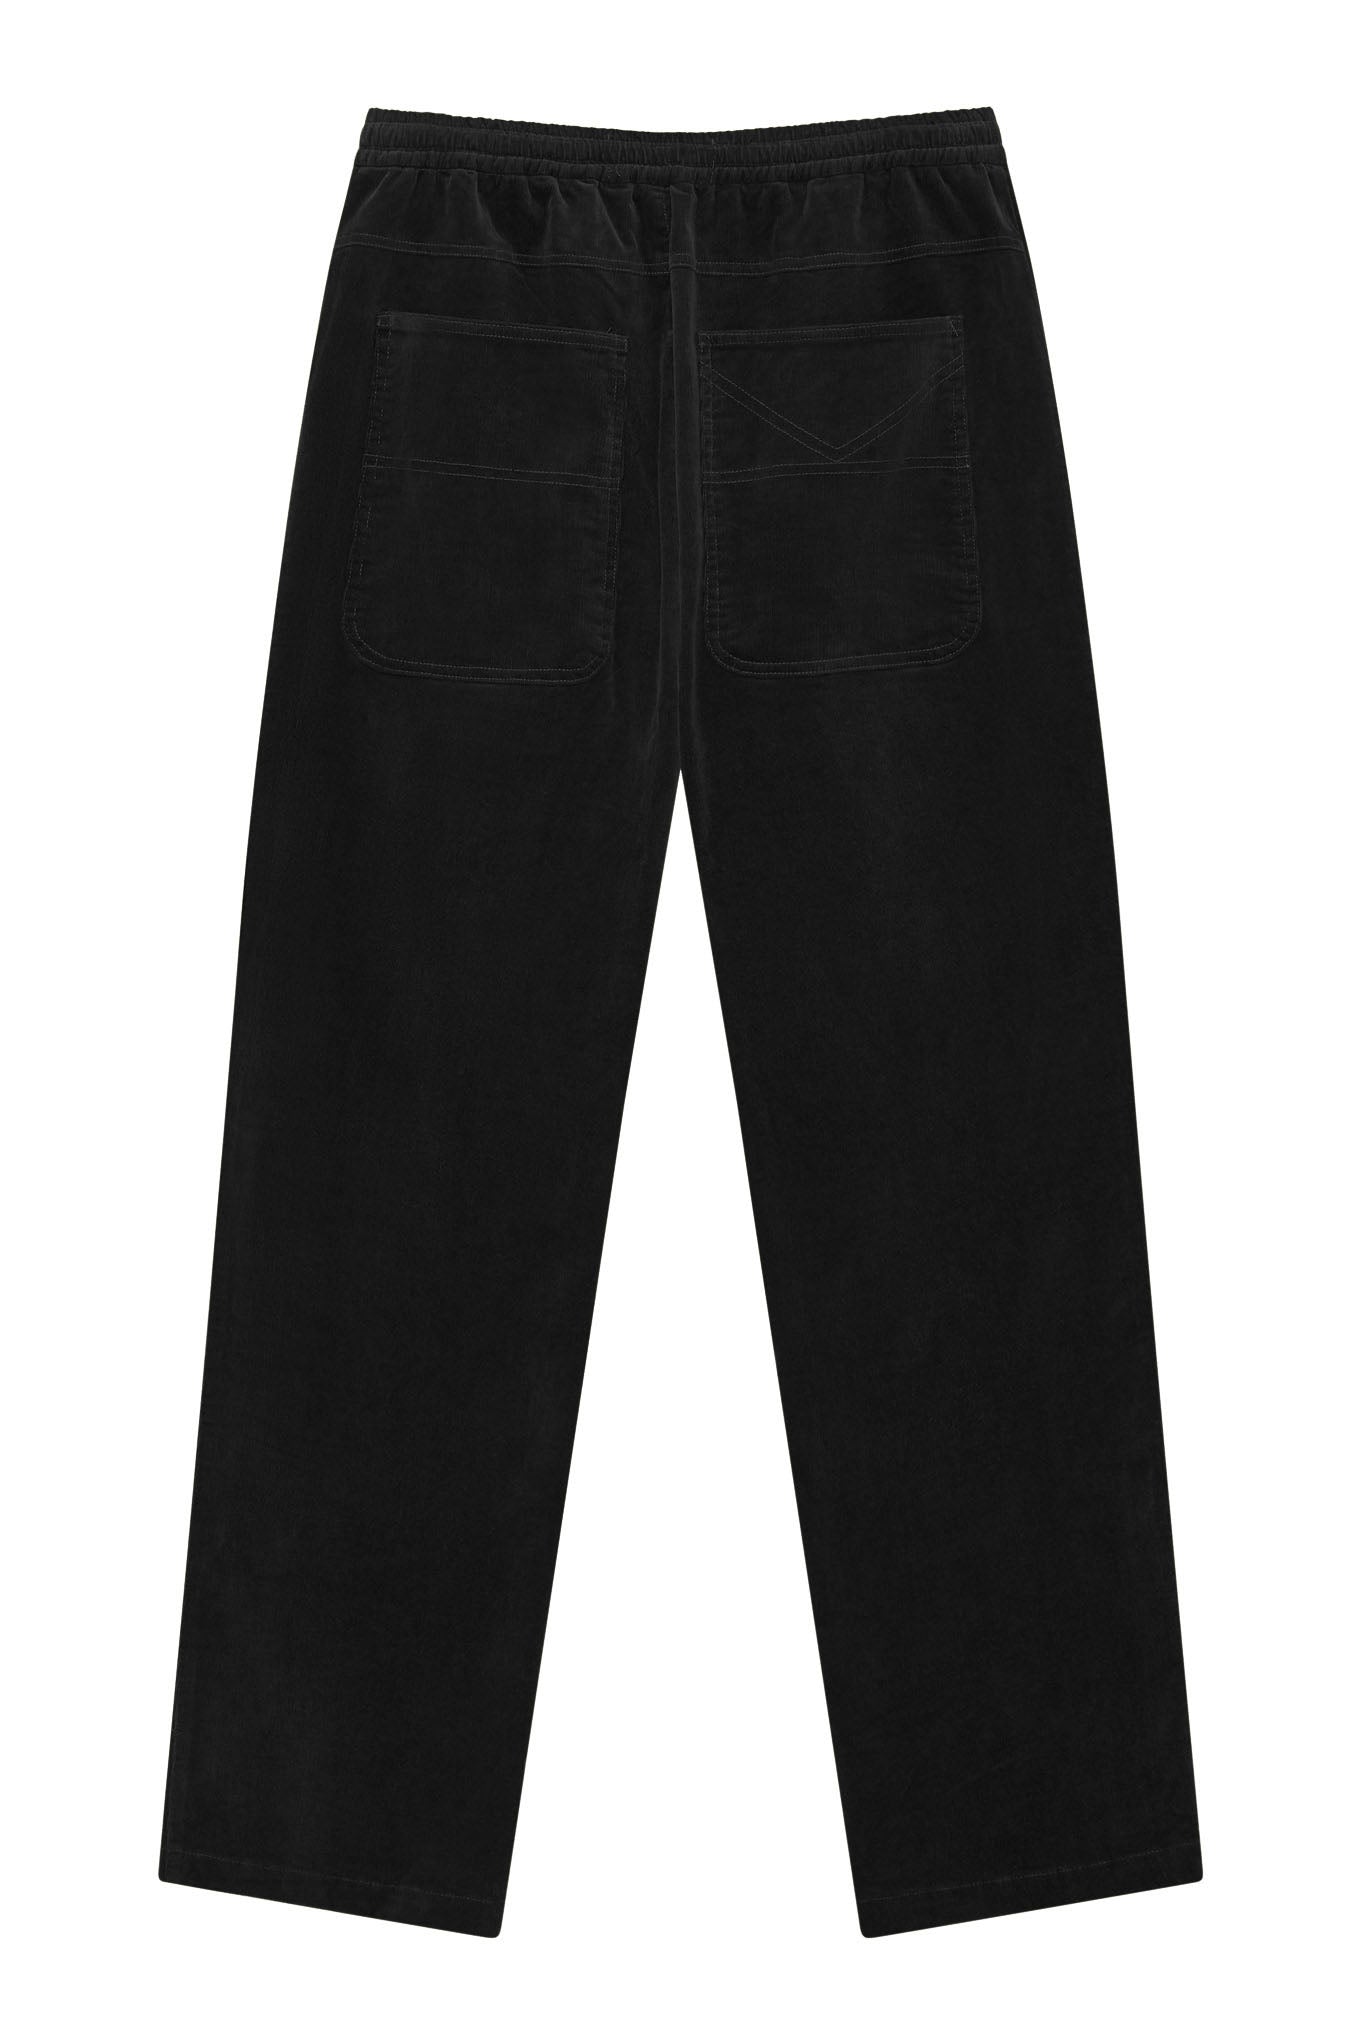 Black corduroy trousers ANDRO made from organic cotton by Komodo